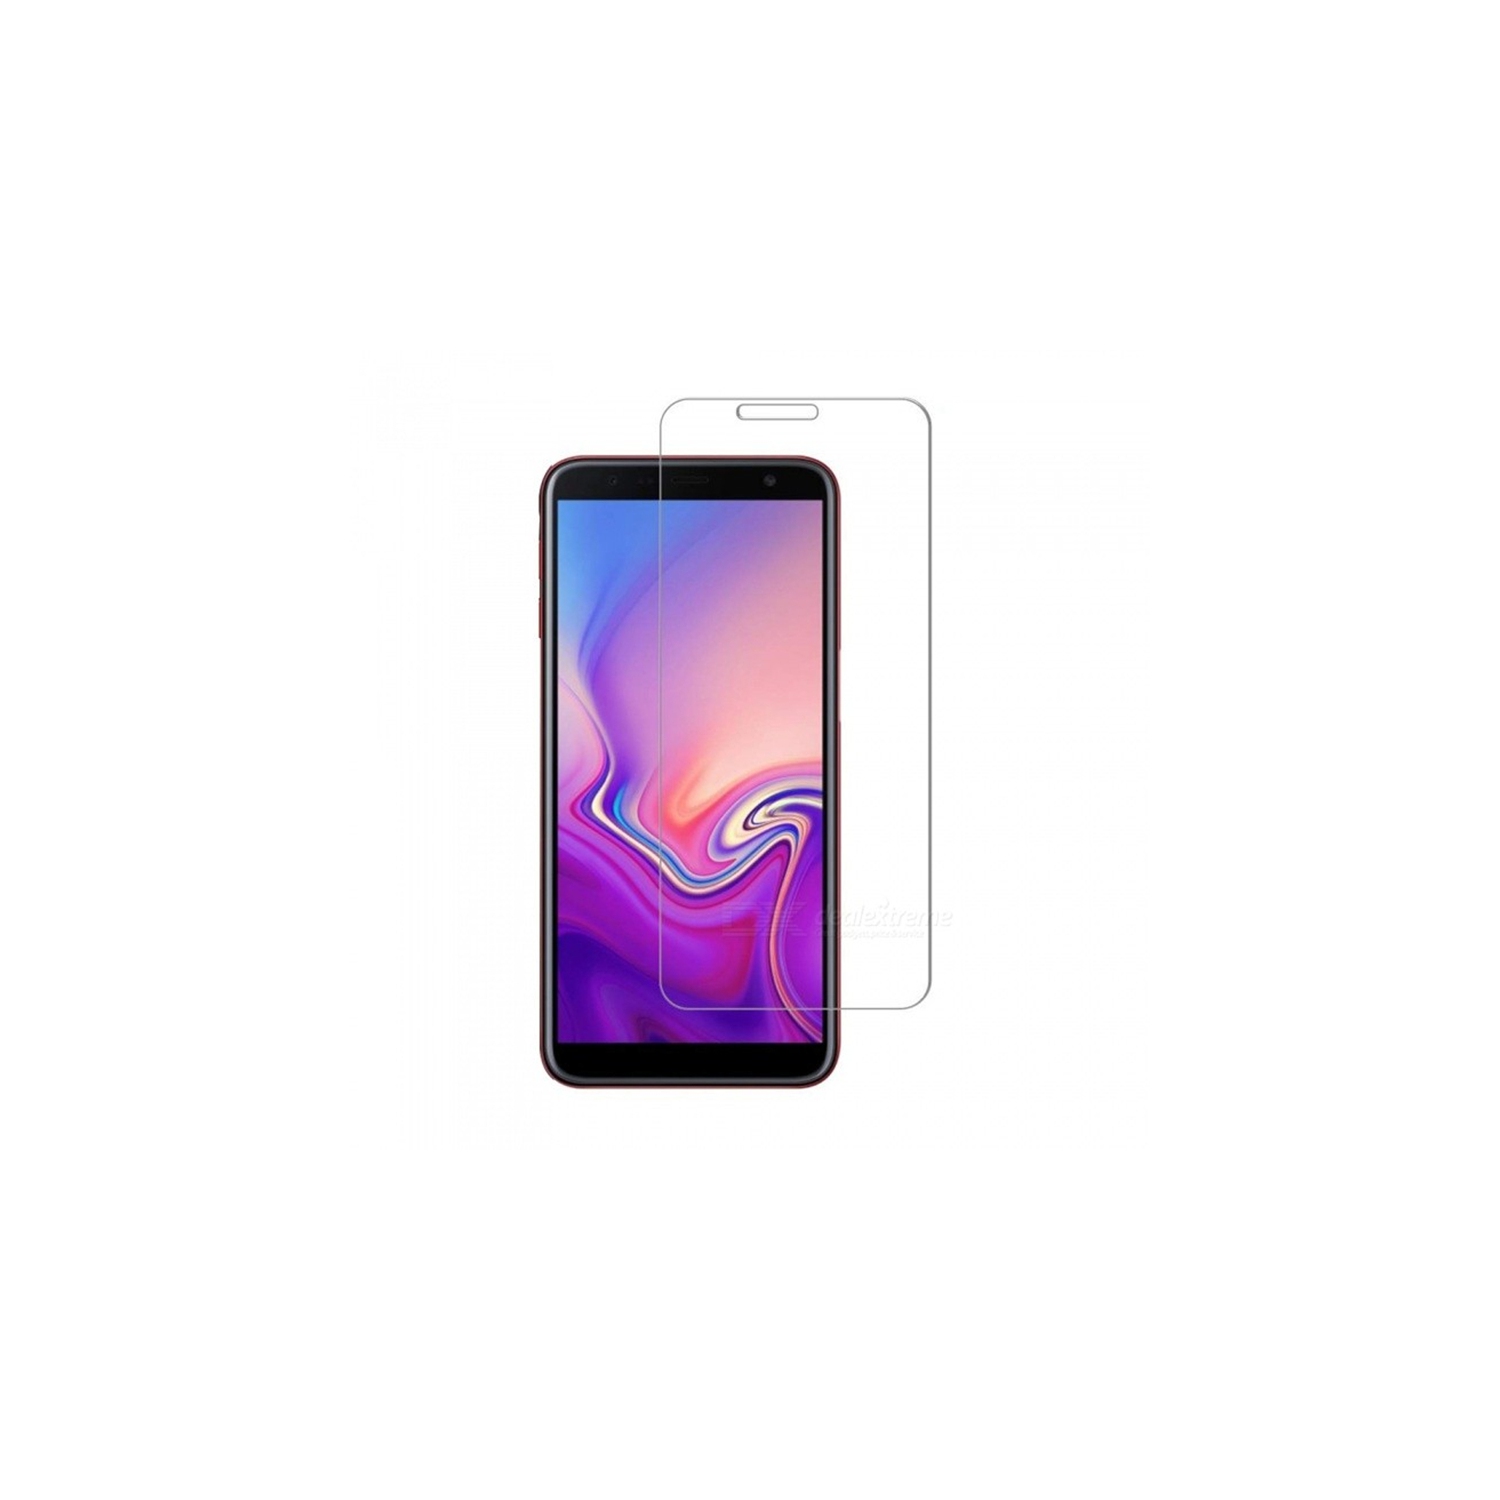 【2 Packs】 CSmart Premium Tempered Glass Screen Protector for Samsung Galaxy J4 Plus / Prime 2018, Case Friendly & Bubble Free